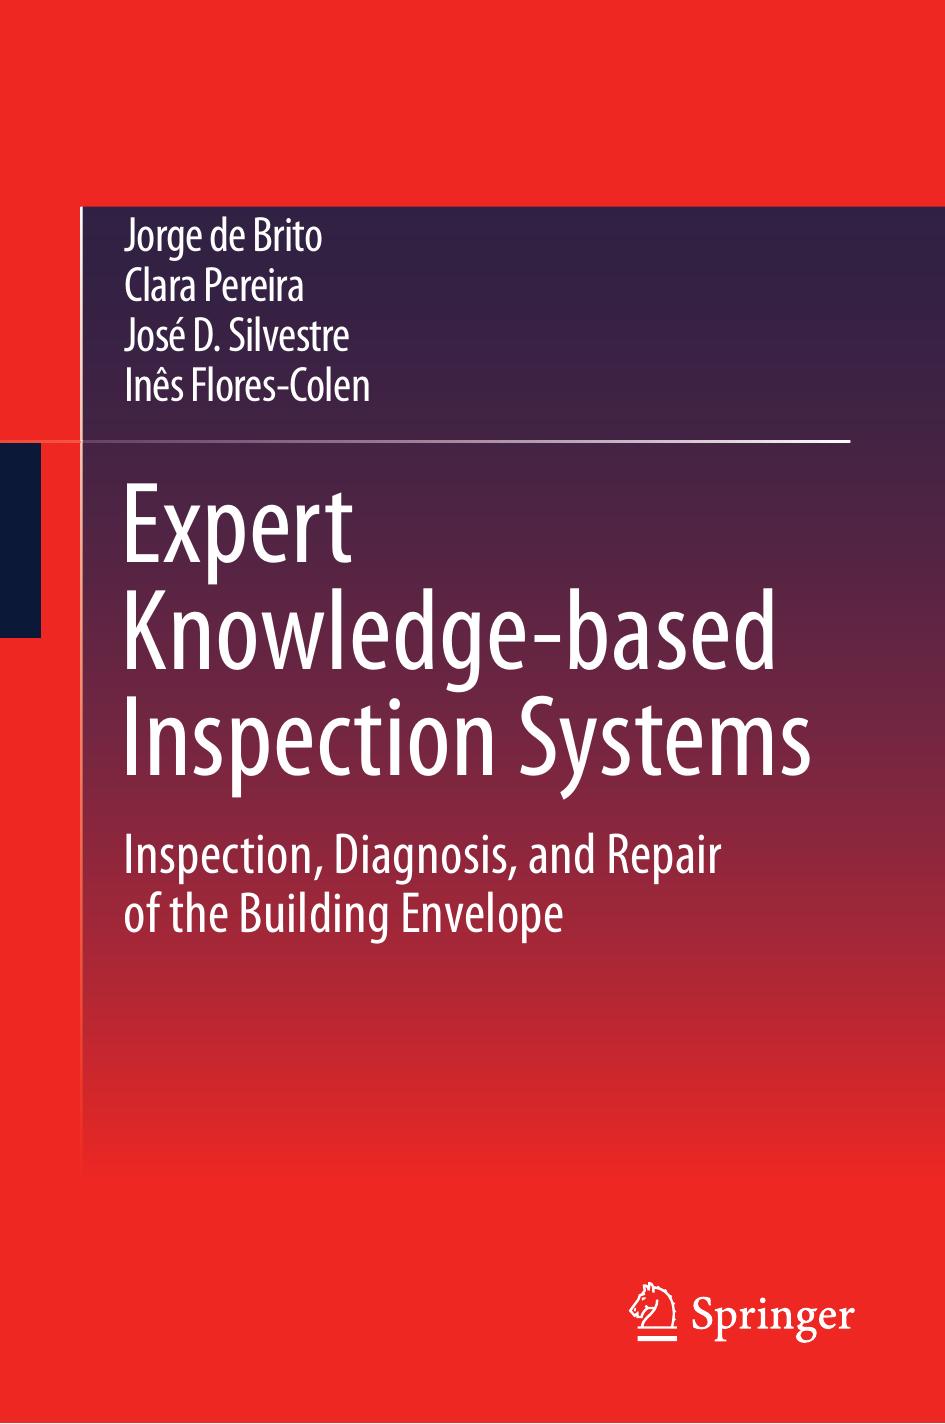 Expert Knowledge-based Inspection Systems  Inspection, Diagnosis, and Repair of the Building Envelope-Springer Internatio (1)